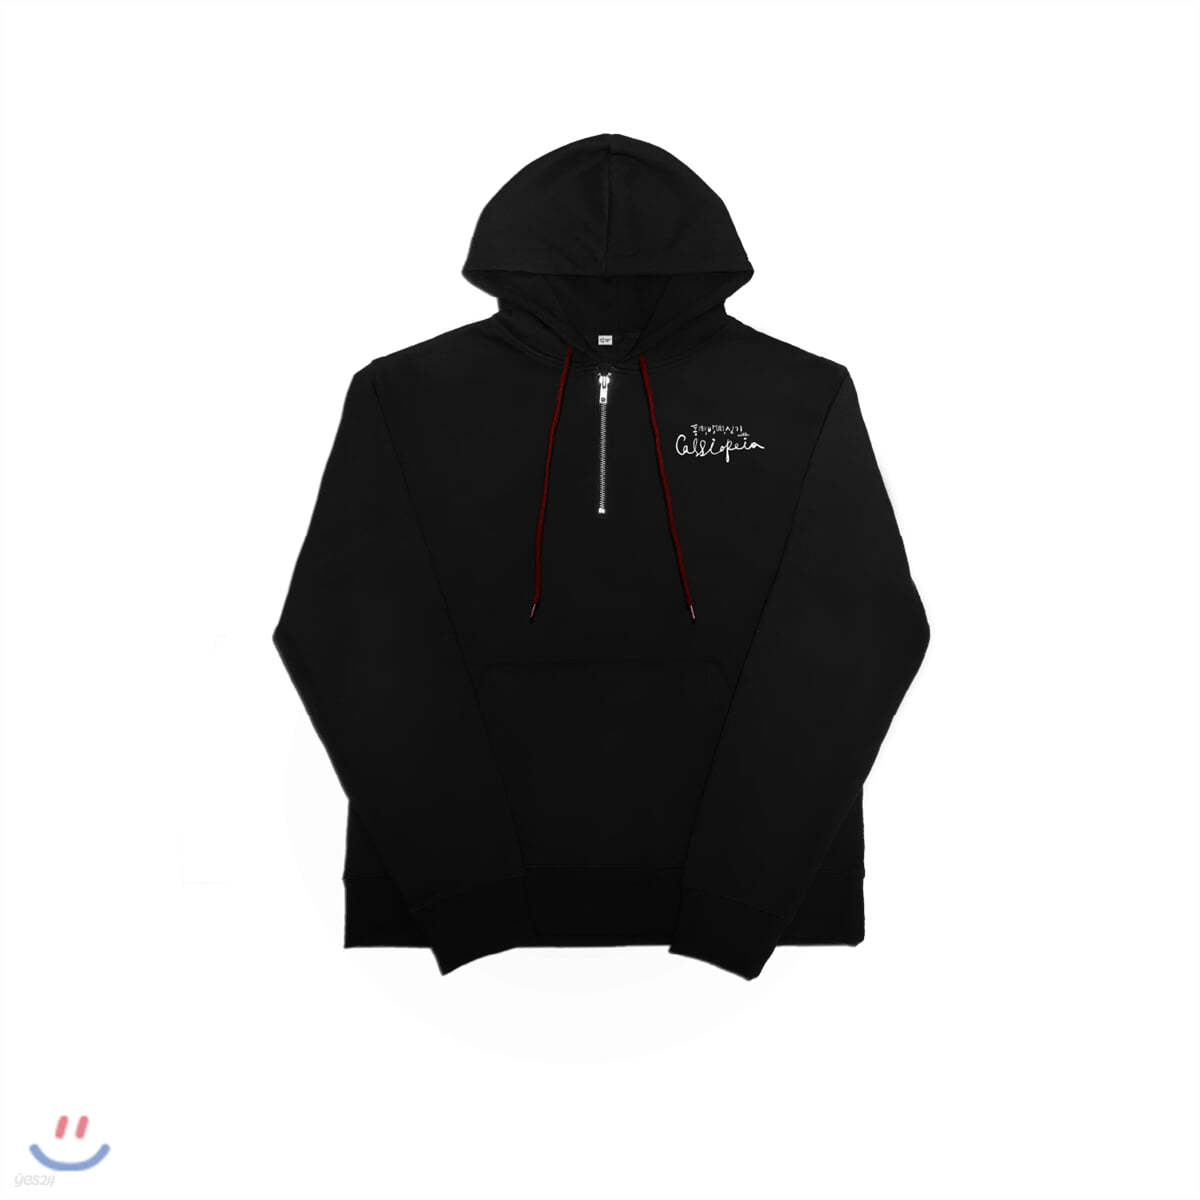 TVXQ! HALF ZIP-UP HOODIE 2020 TVXQ! ONLINE FANMEETING 동(冬),방(房),신기 with Cassiopeia